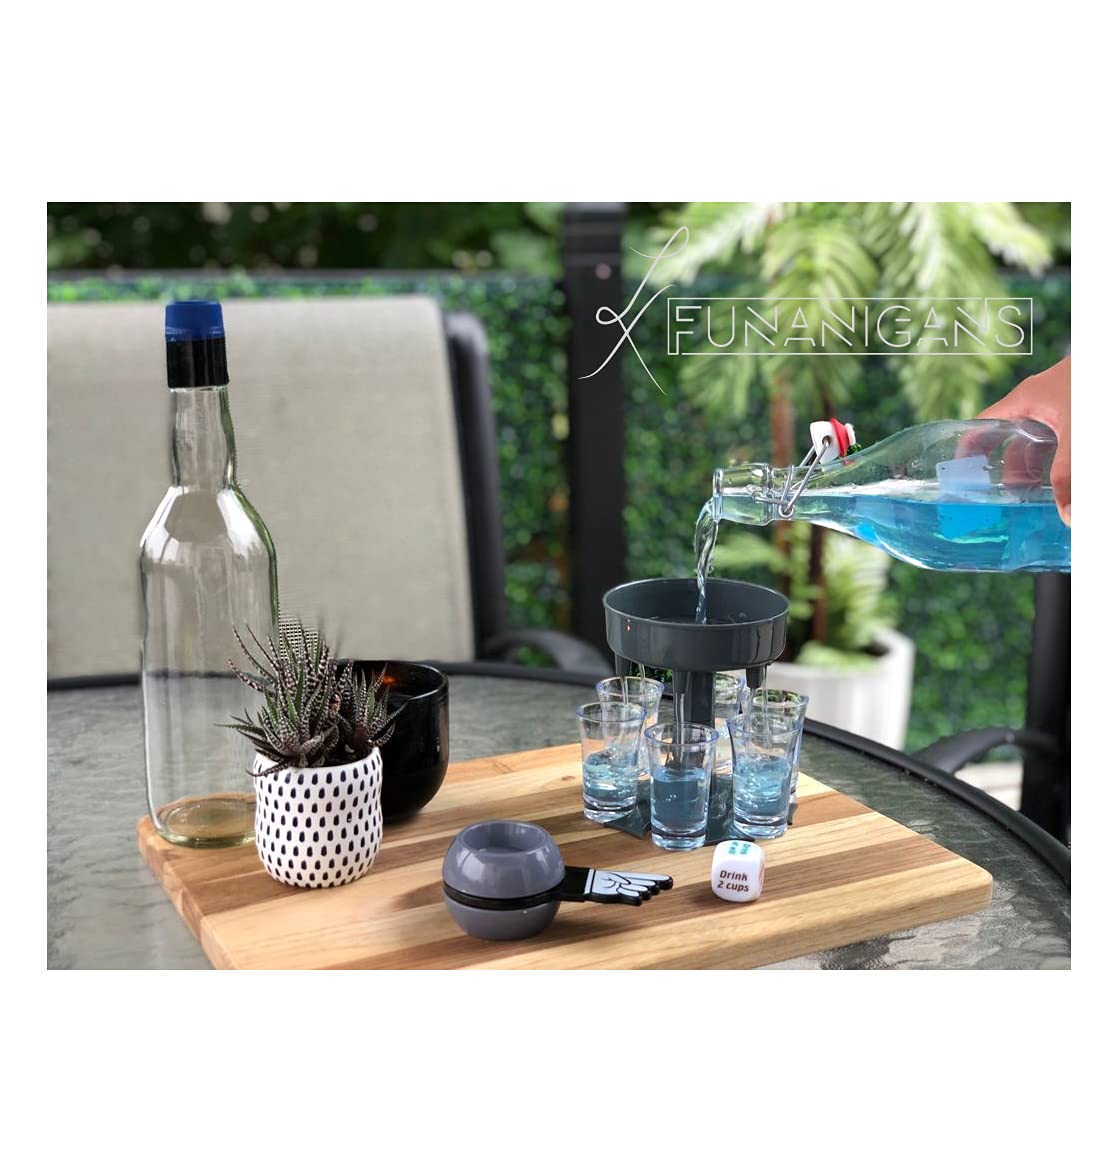 6 Shot Glass Dispenser and Holder (Includes 6 shot cups) with Shot Twister and 1pc Game Dice. Shot Dispenser, Shot Holder, Shot games, Drink Dispenser. Dark Grey, For All Types of Drinks